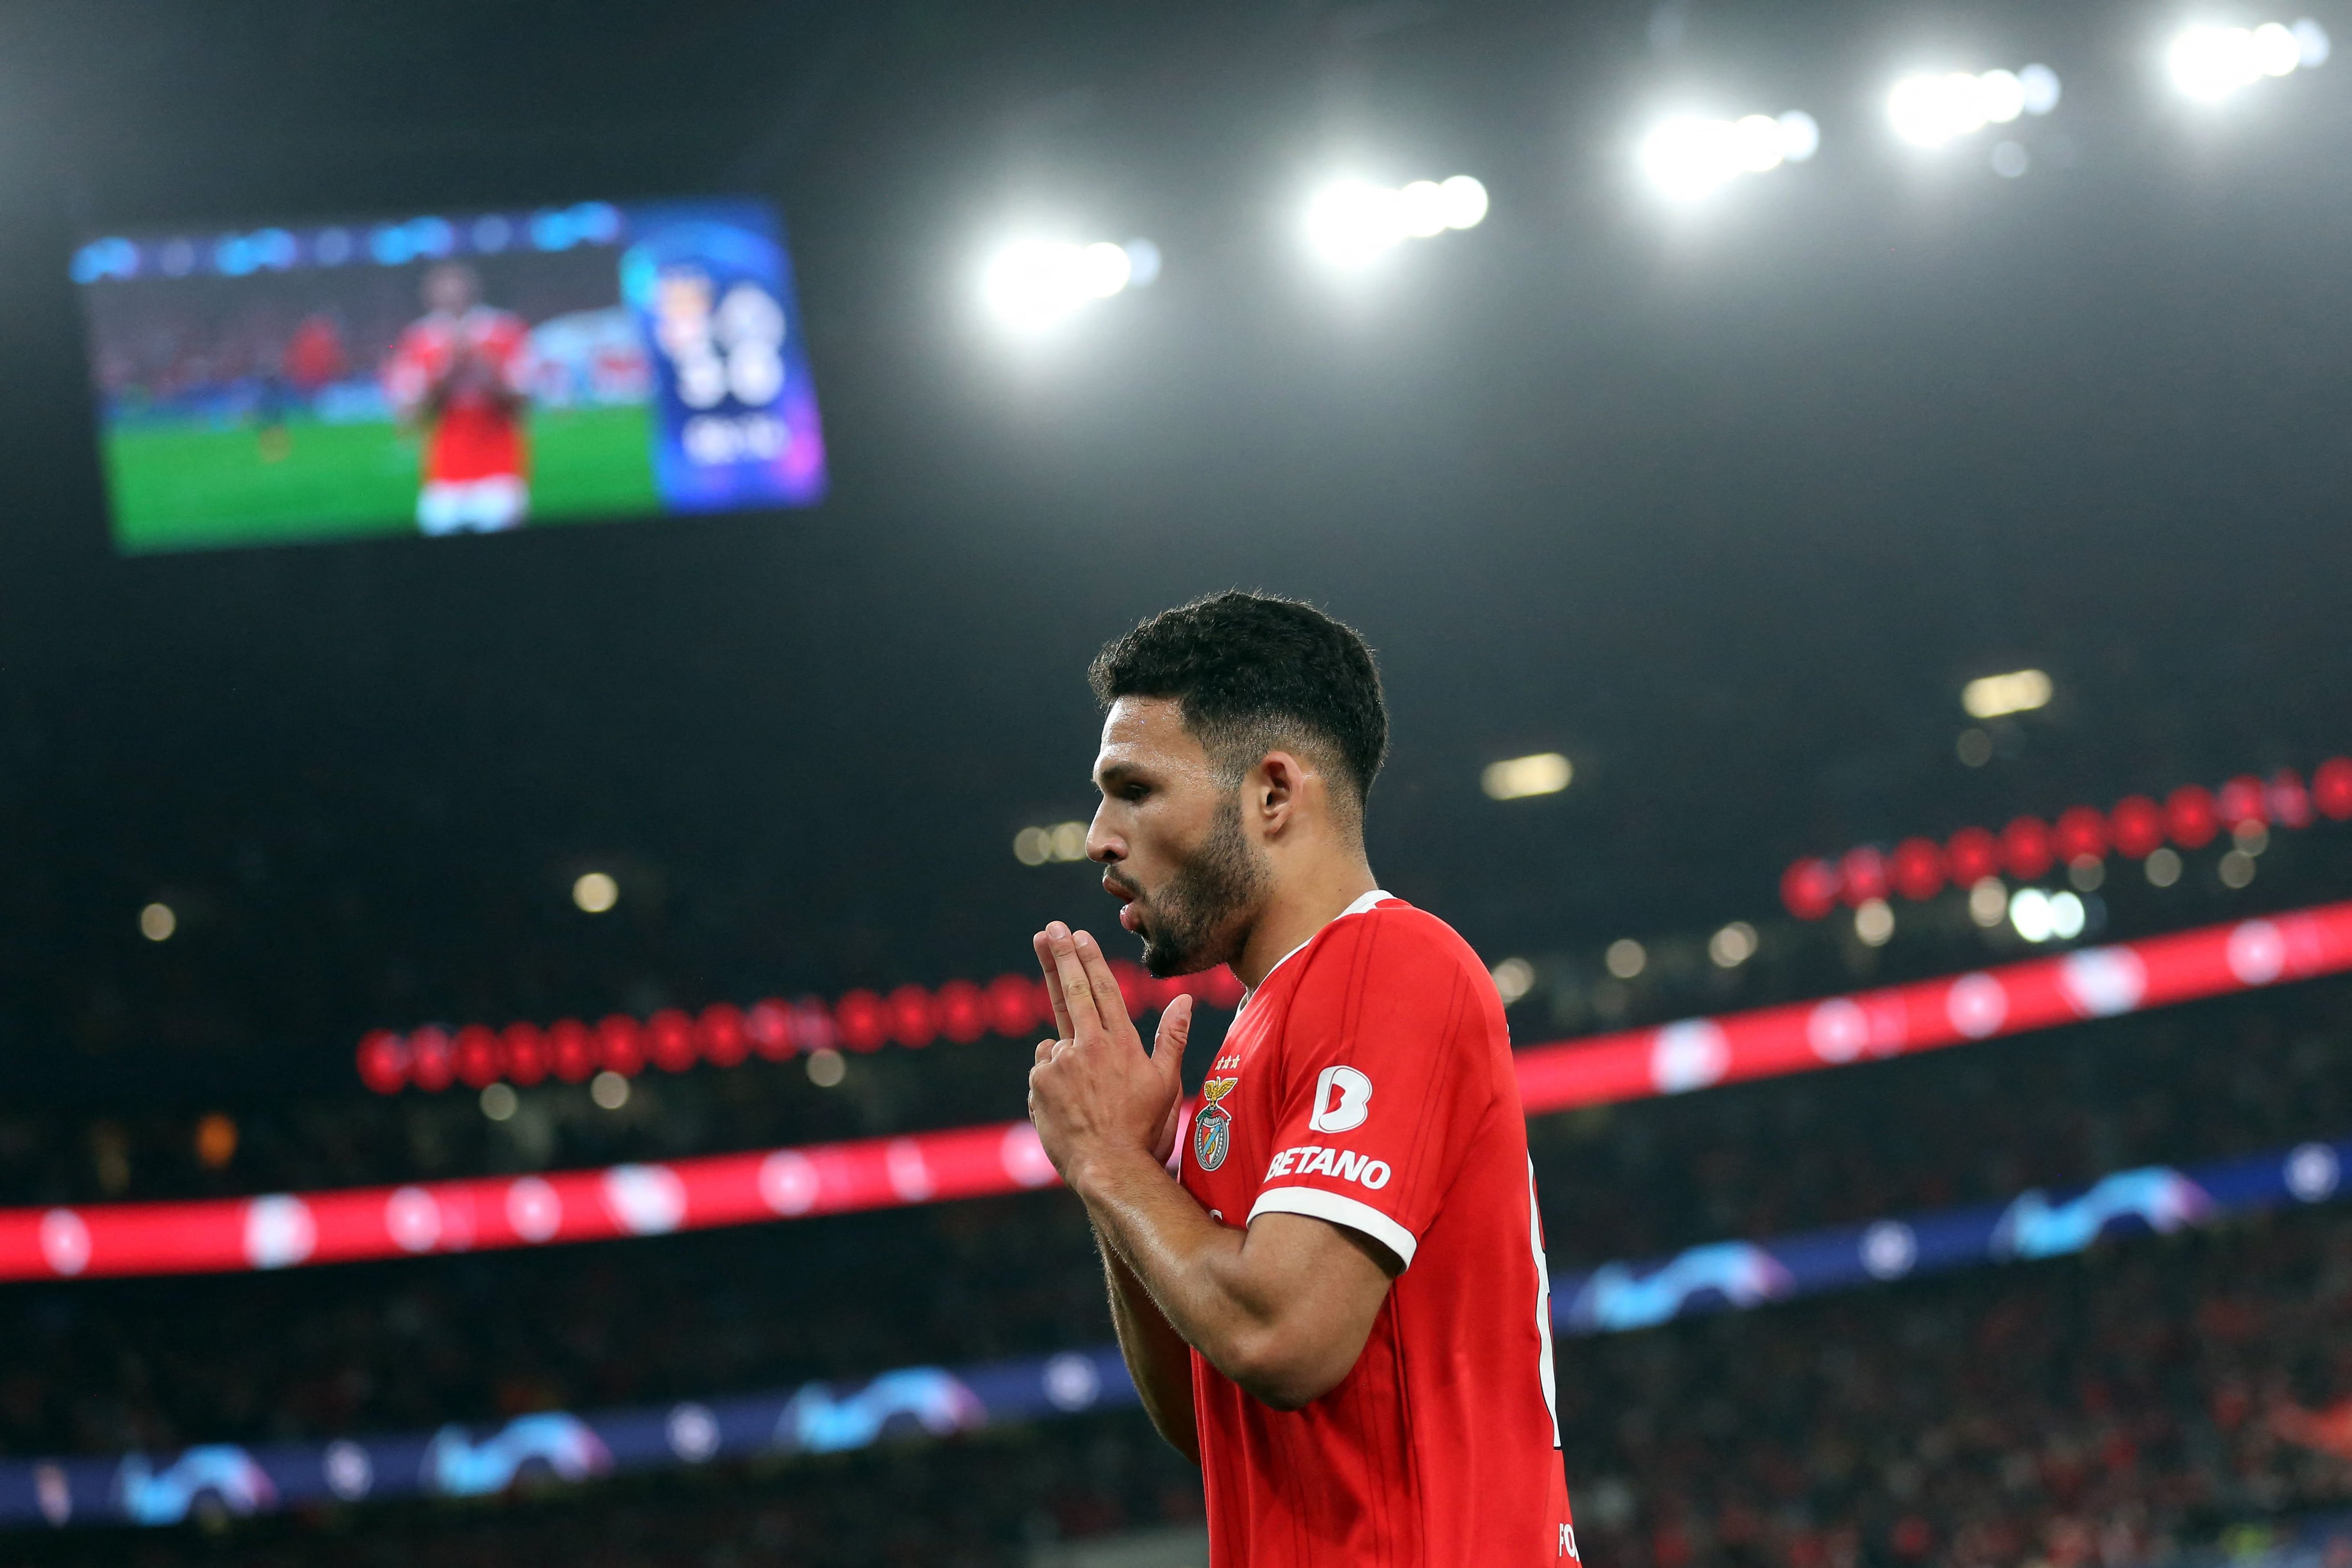 Benfica's Portuguese forward Goncalo Ramos celebrates scoring his team's third goal during the UEFA Champions League round of 16 second leg football match between SL Benfica and Club Brugge at the Luz stadium in Lisbon on March 7, 2023. (Photo by CARLOS COSTA / AFP)